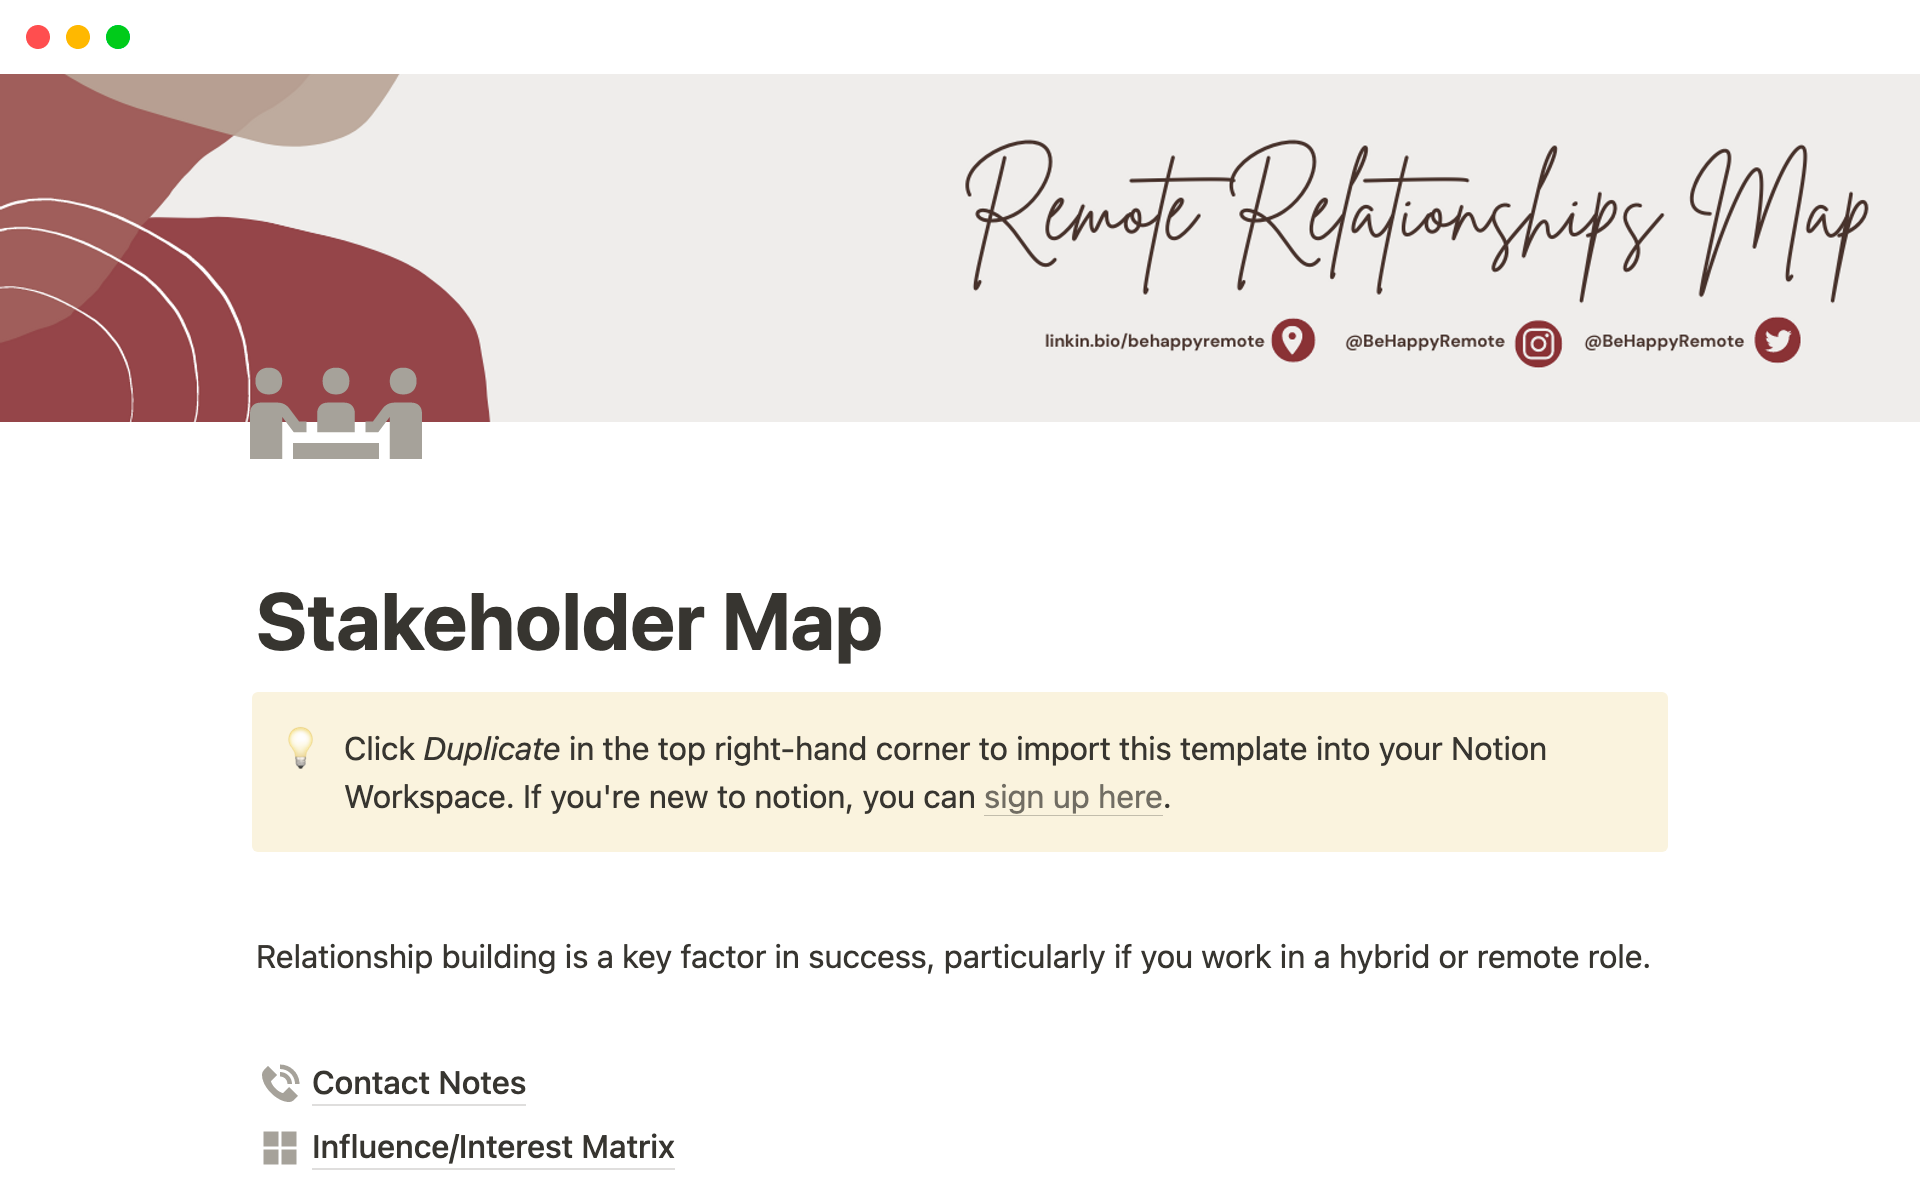 The Remote Relationship Map is a digital tool to help remote and hybrid workers deepen their work relationships and understand how to manage these relationships to succeed.